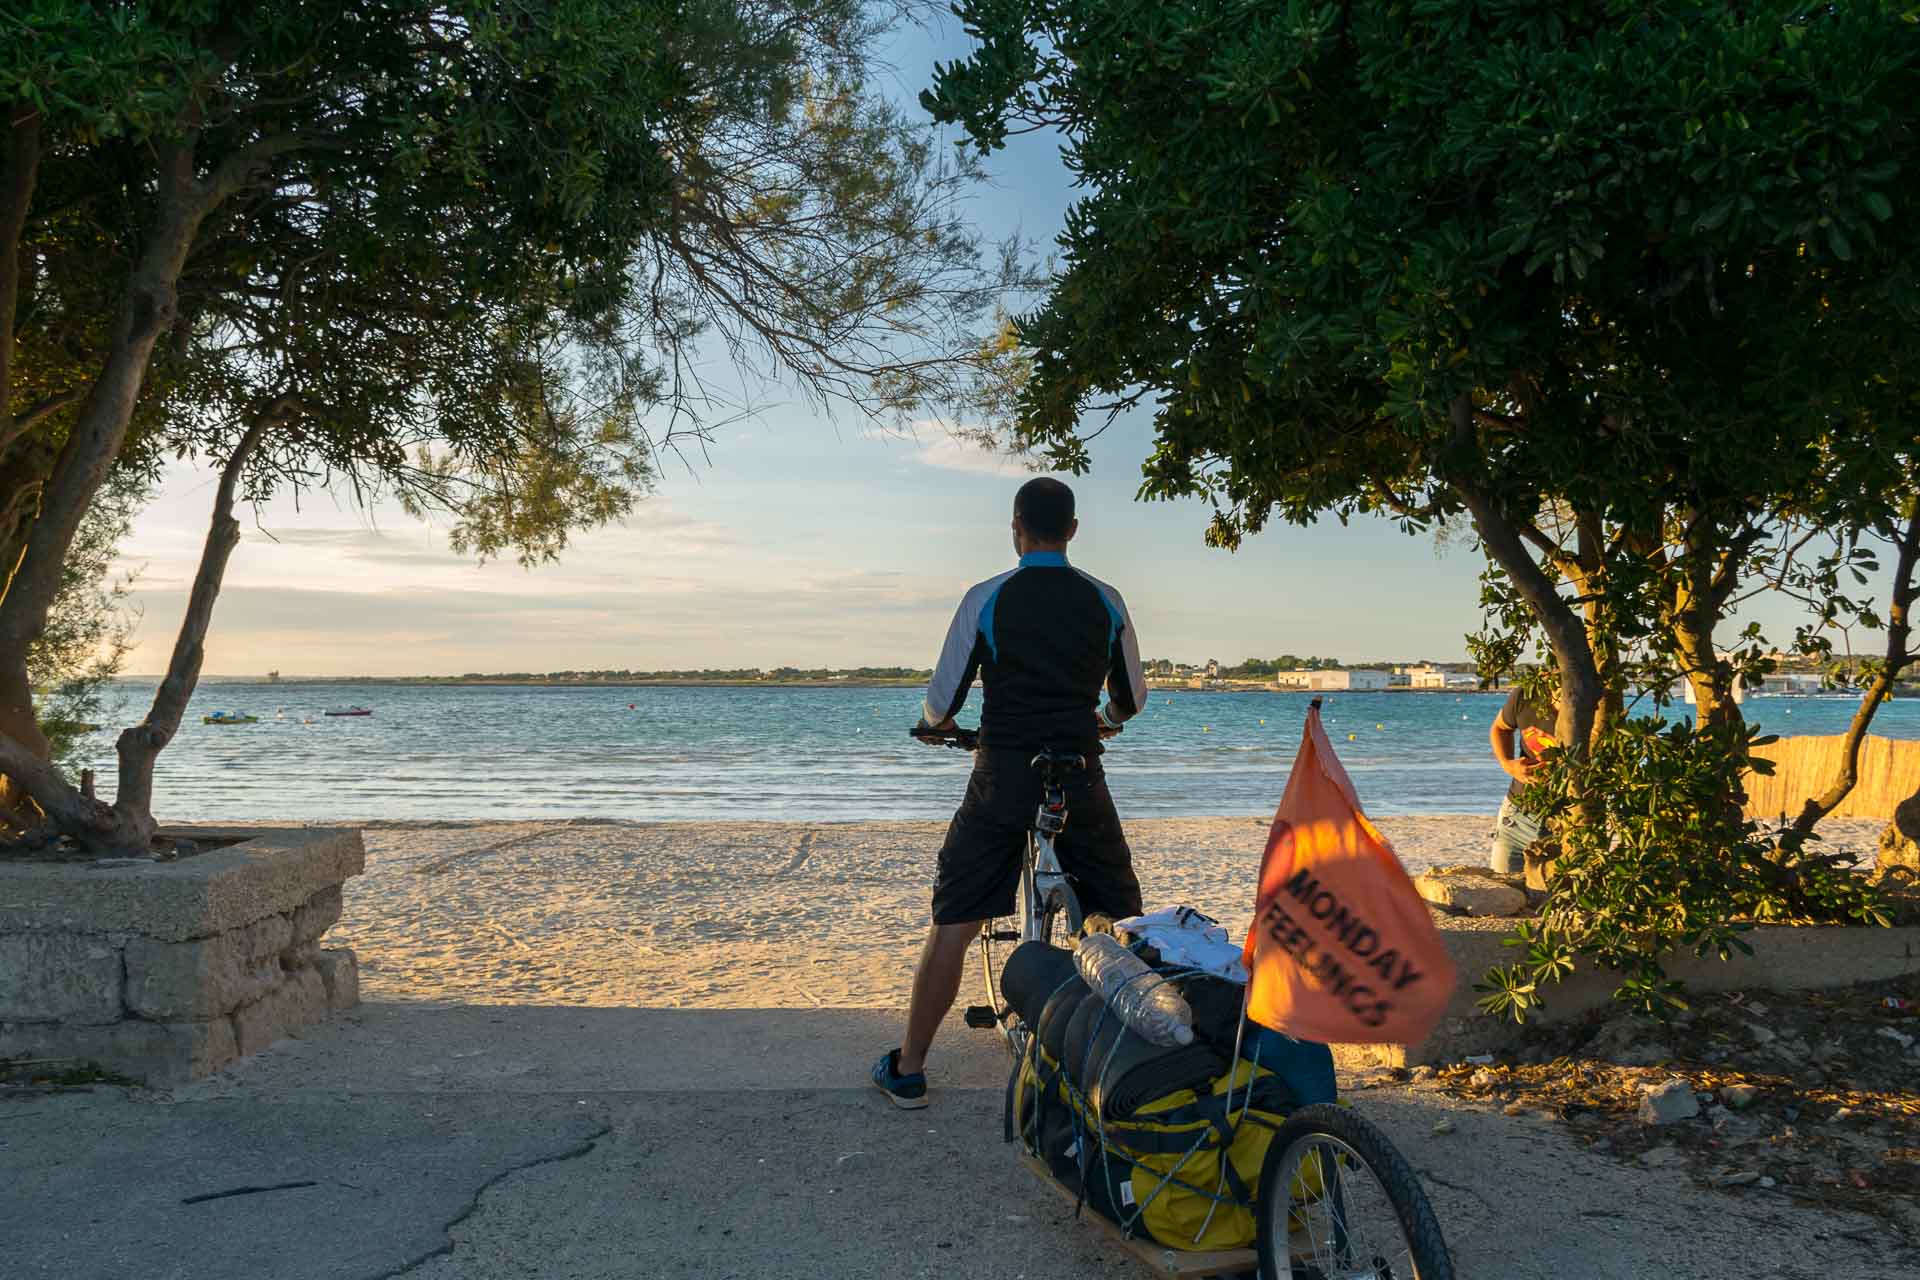 Our Puglia itinerary was done by bike, with Tiago looking at the beach with trees on each side